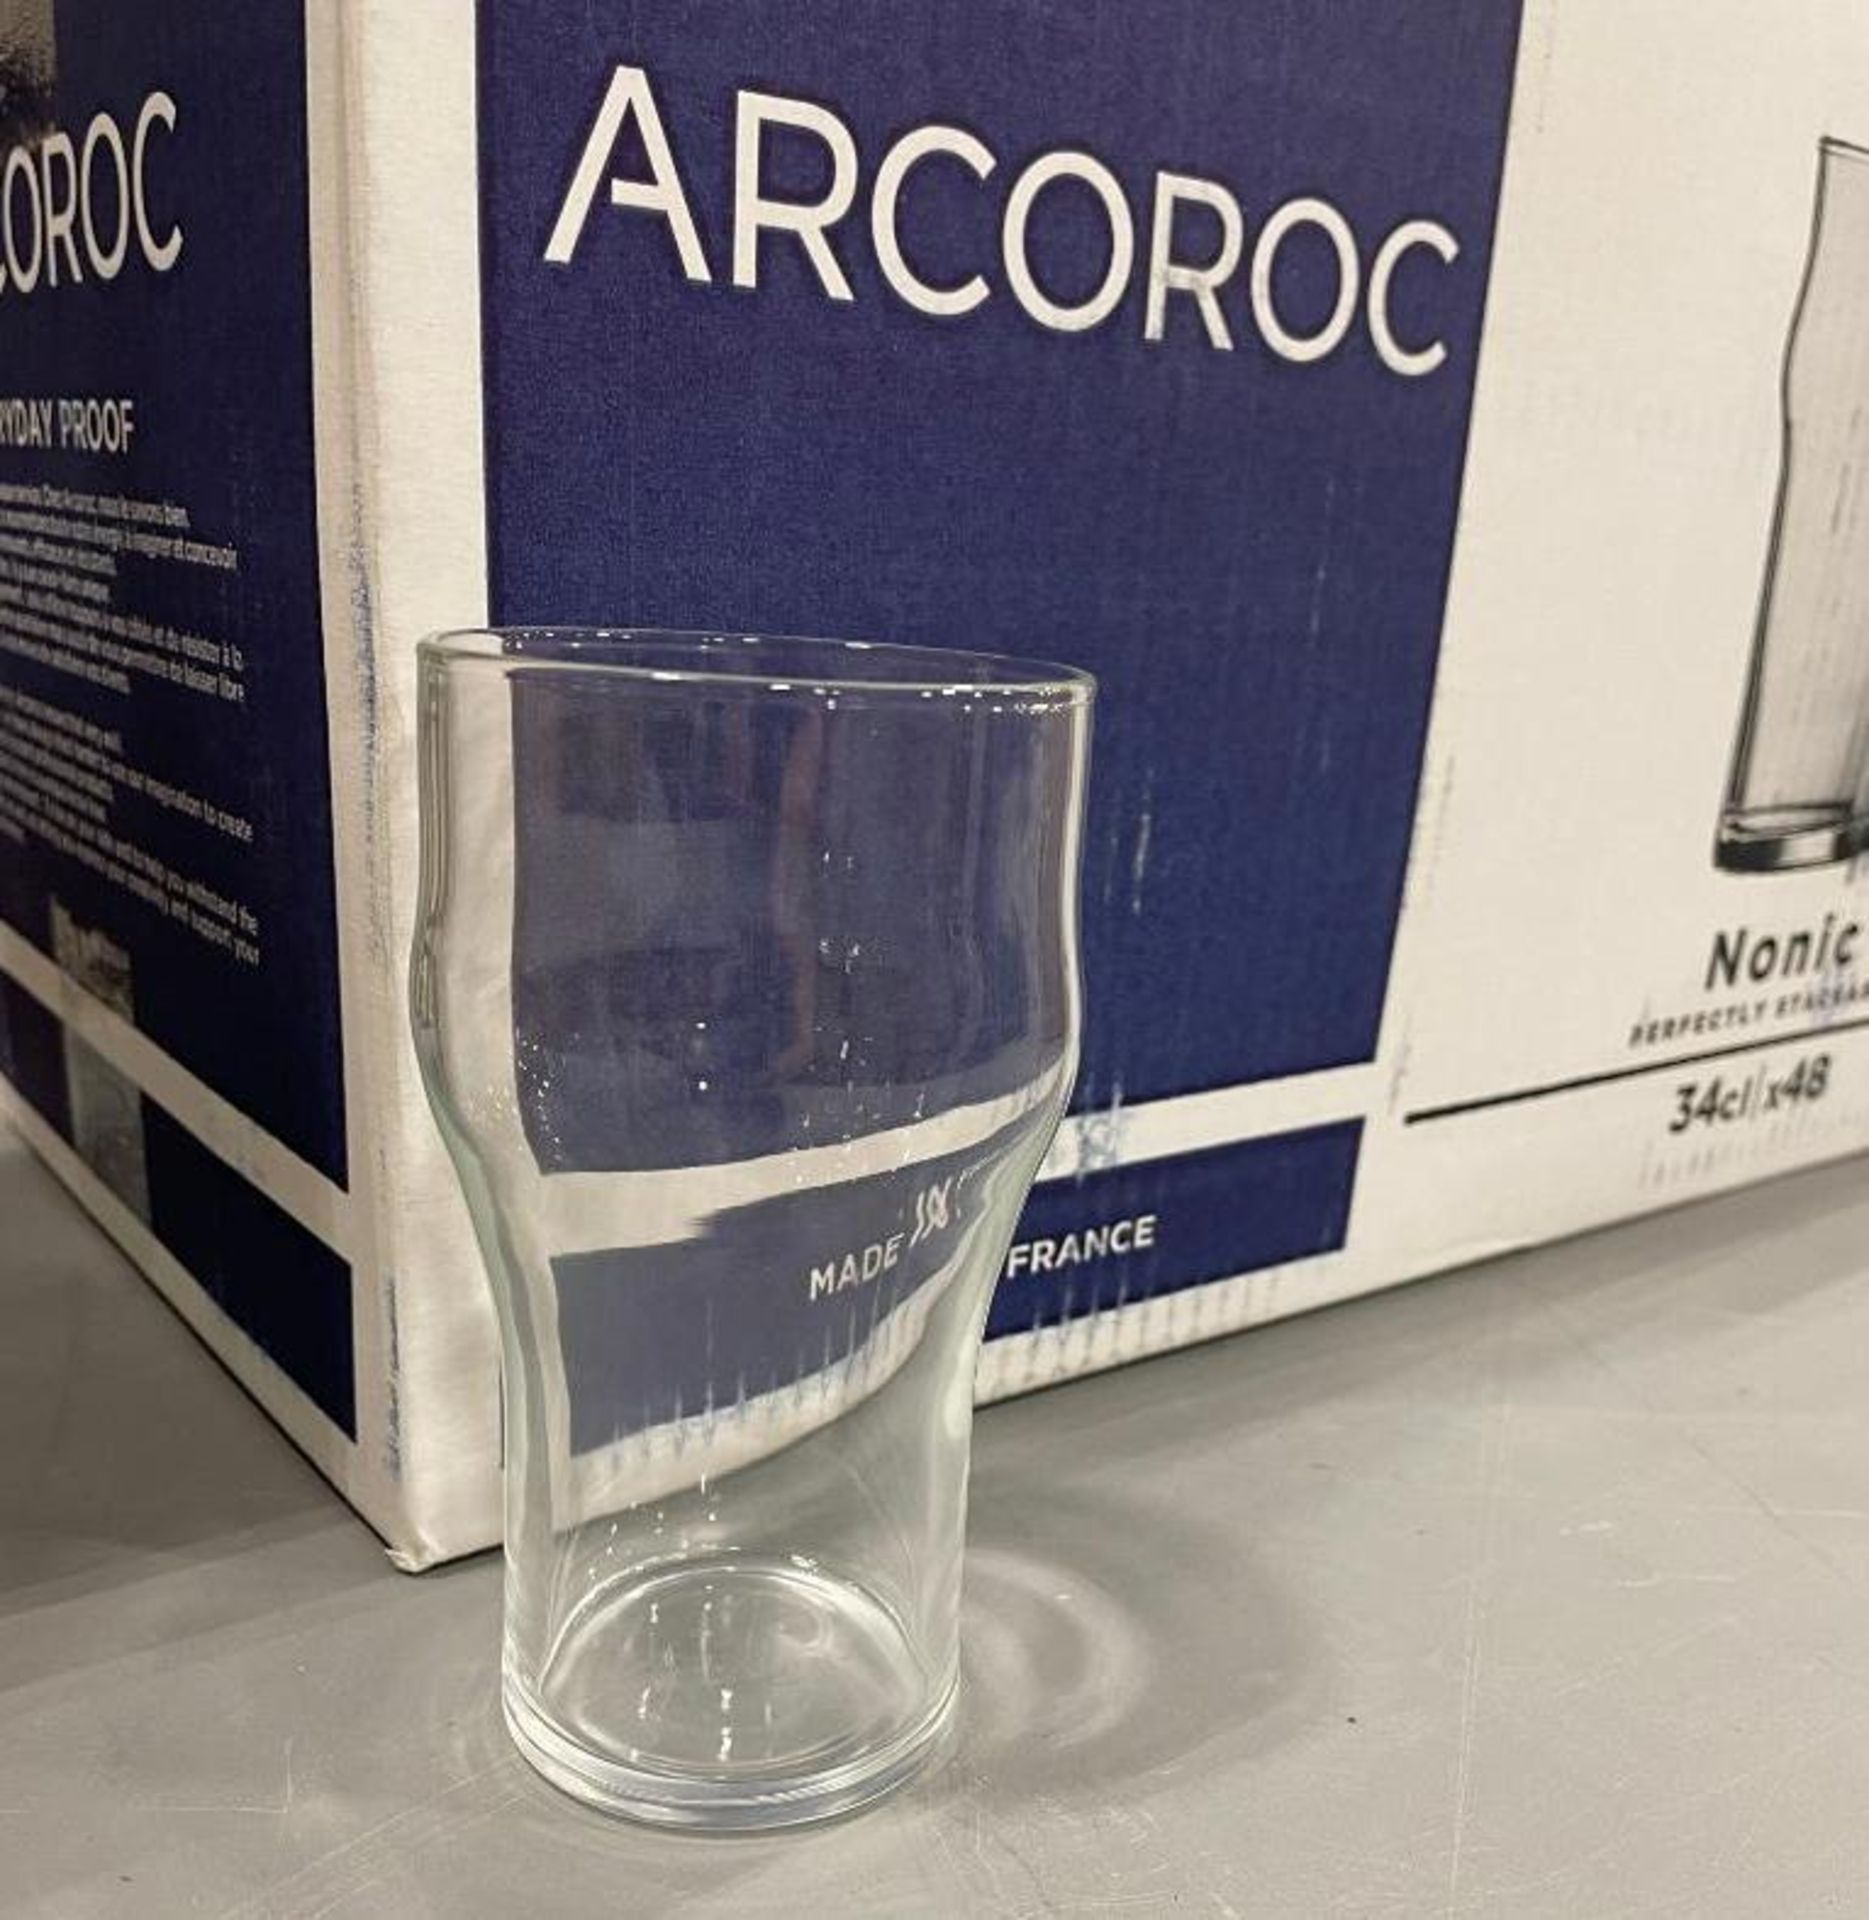 2 CASES OF 12OZ NONIC BEER GLASS, ARCOROC 43740 - 24 PER CASE - Image 3 of 14